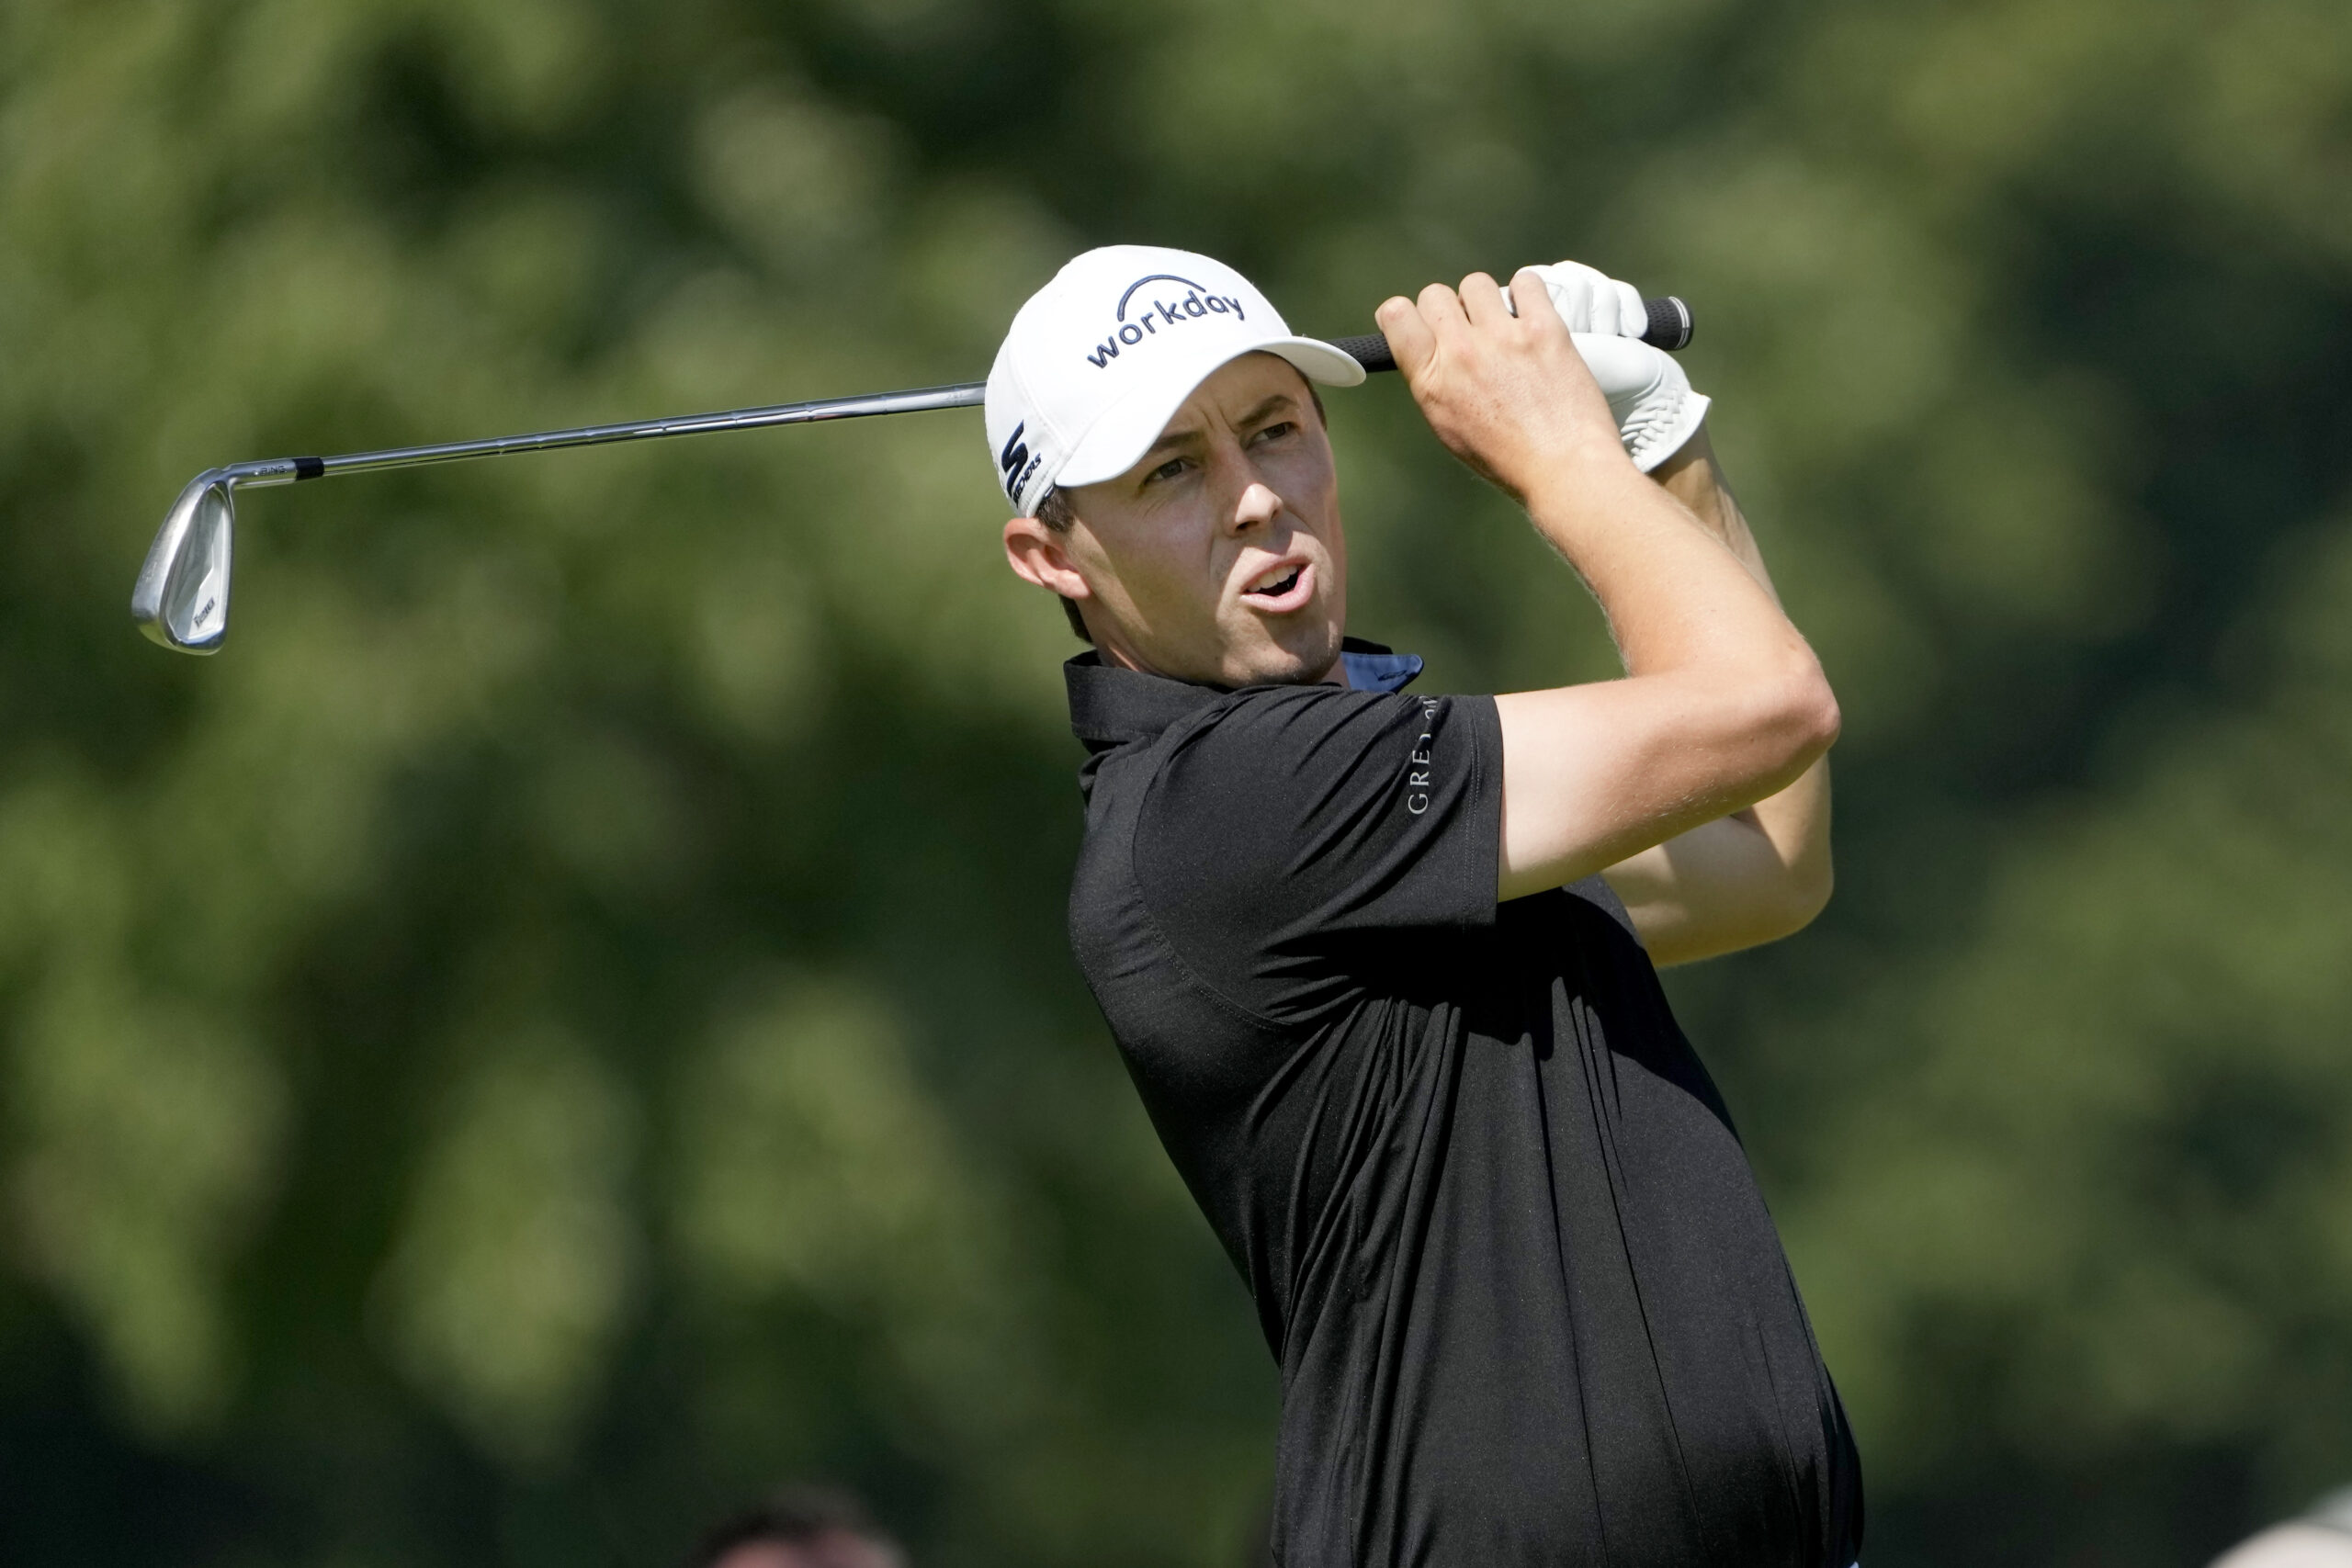 Matt Fitzpatrick shares the lead with Scottie Scheffler heading into the final round of the BMW Championship